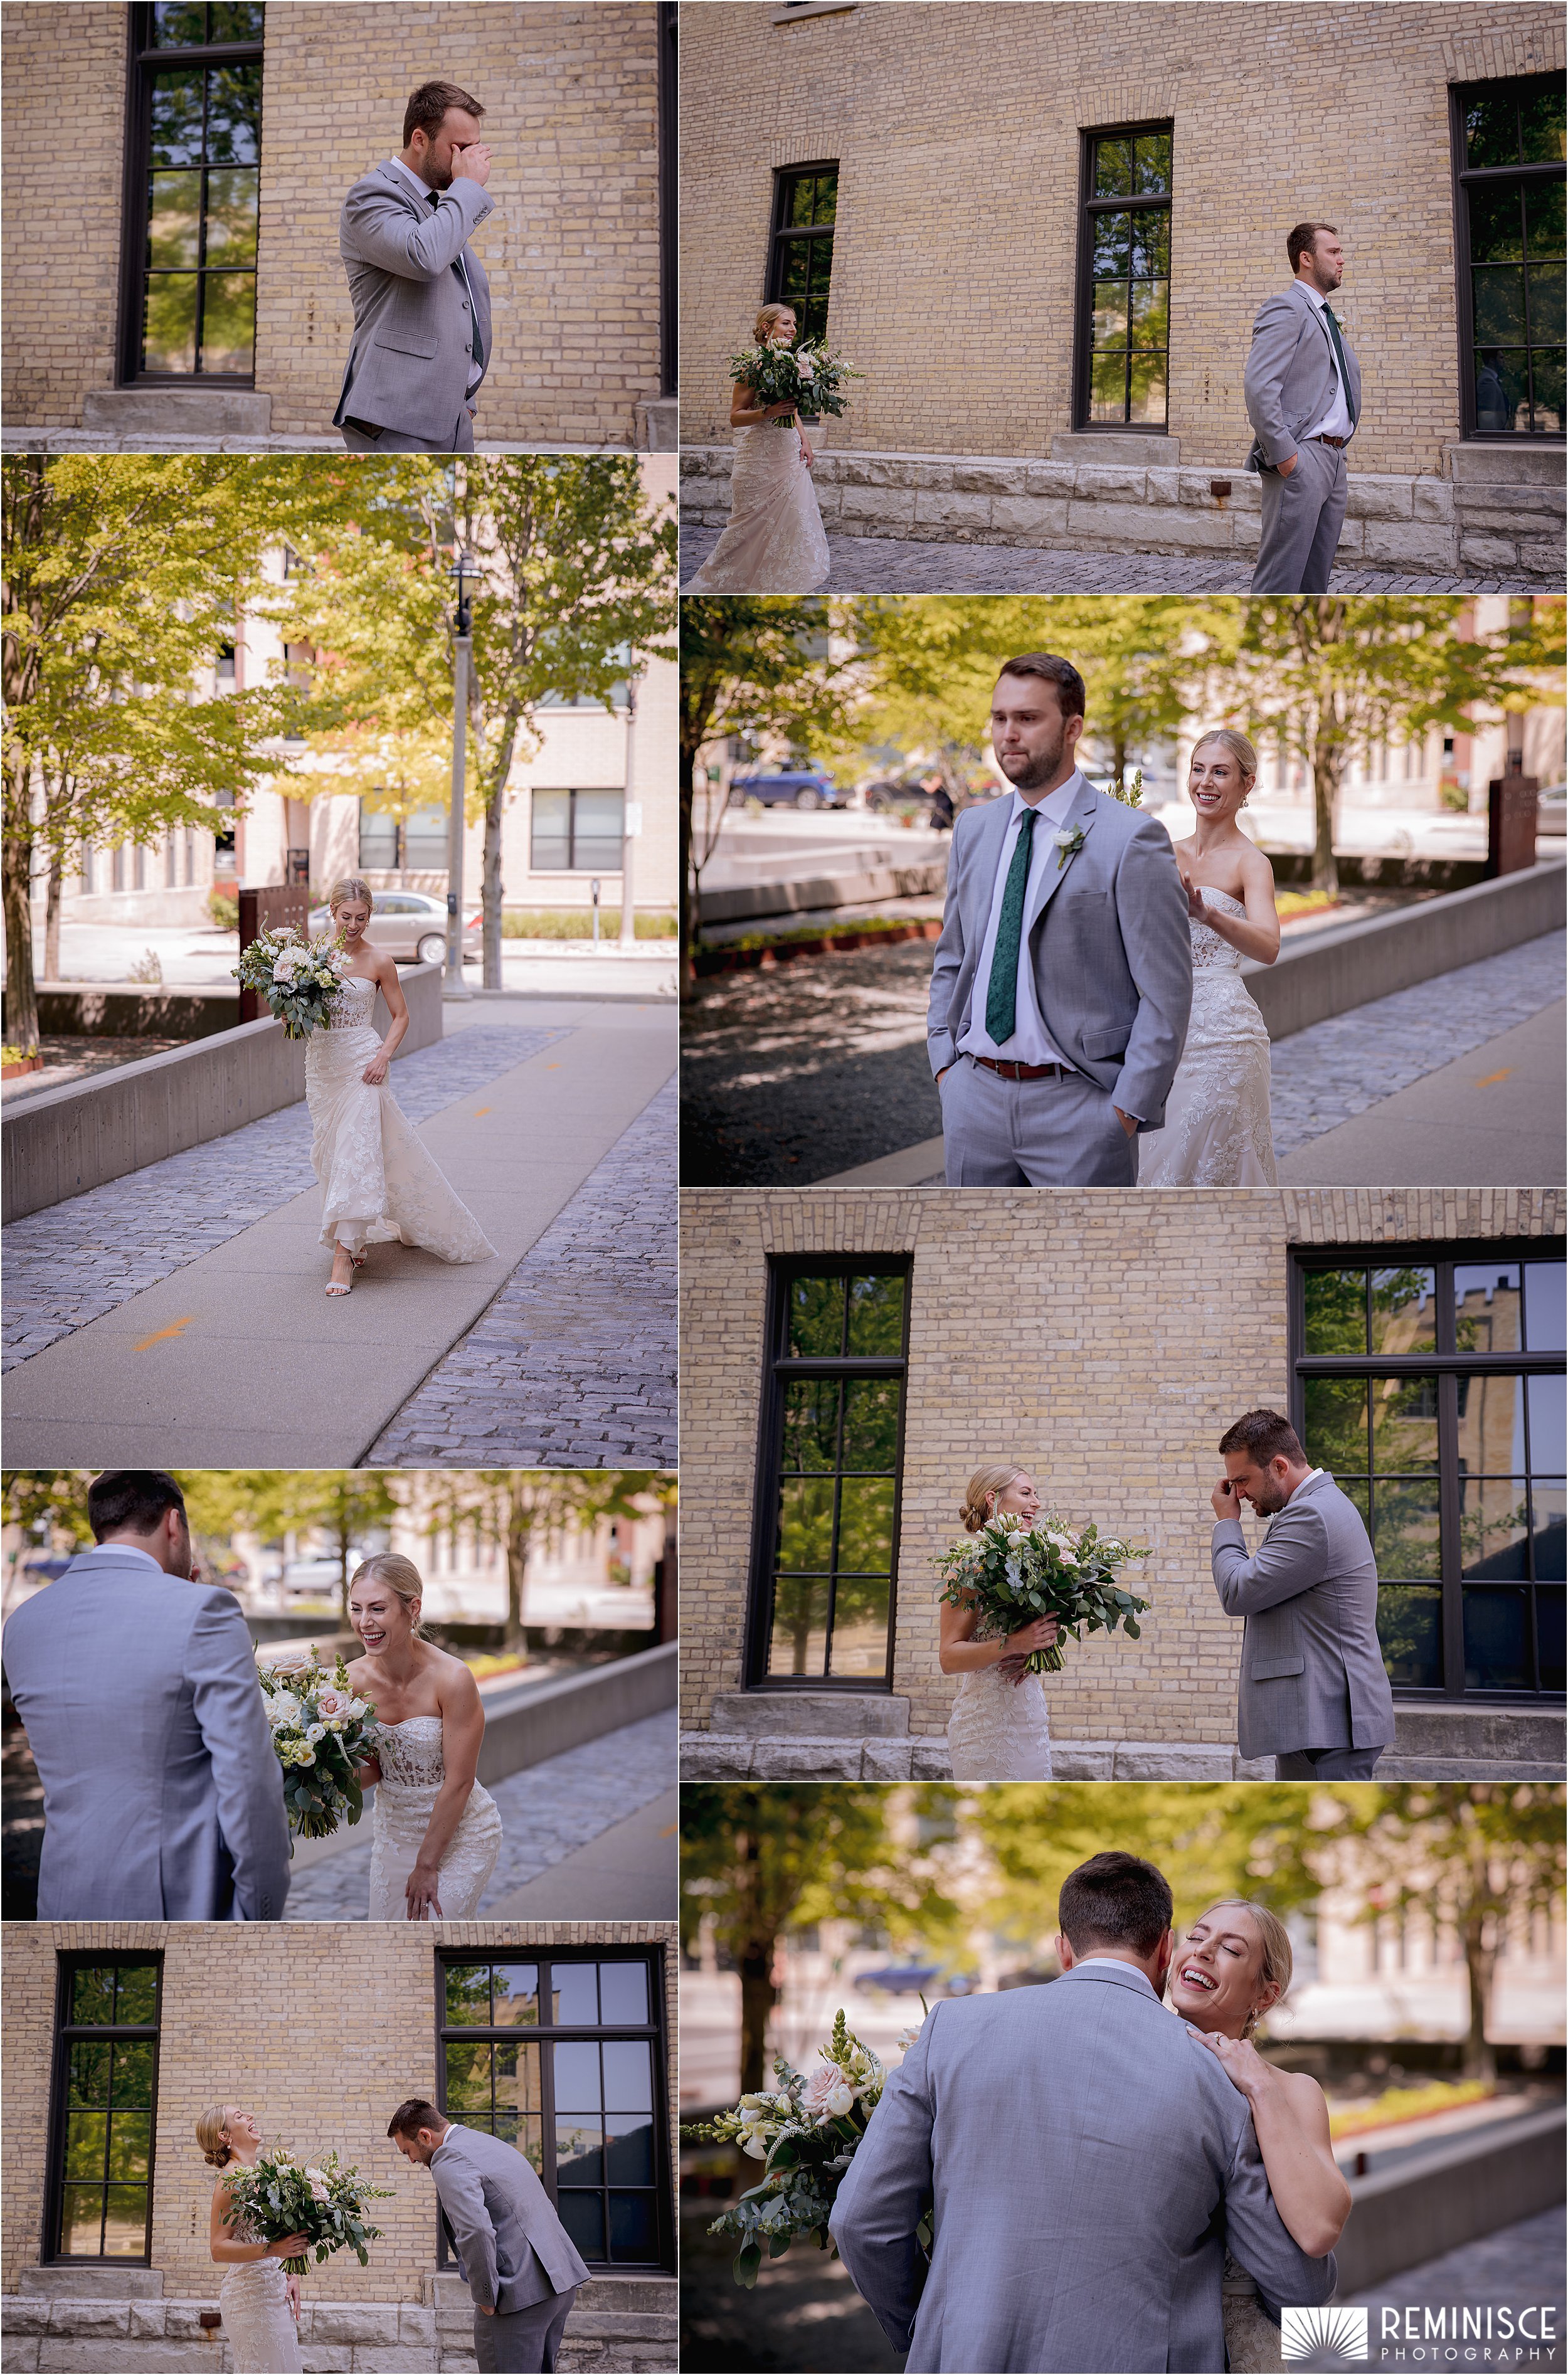 Best Milwaukee wedding photographer servicing Milwaukee, Madison and Chicago in Wisconsin and Illinois. Artistic, fun, and candid wedding photography featuring engagements, elopements, bride groom portraits, LGBT wedding ceremony and wedding reception photographs.